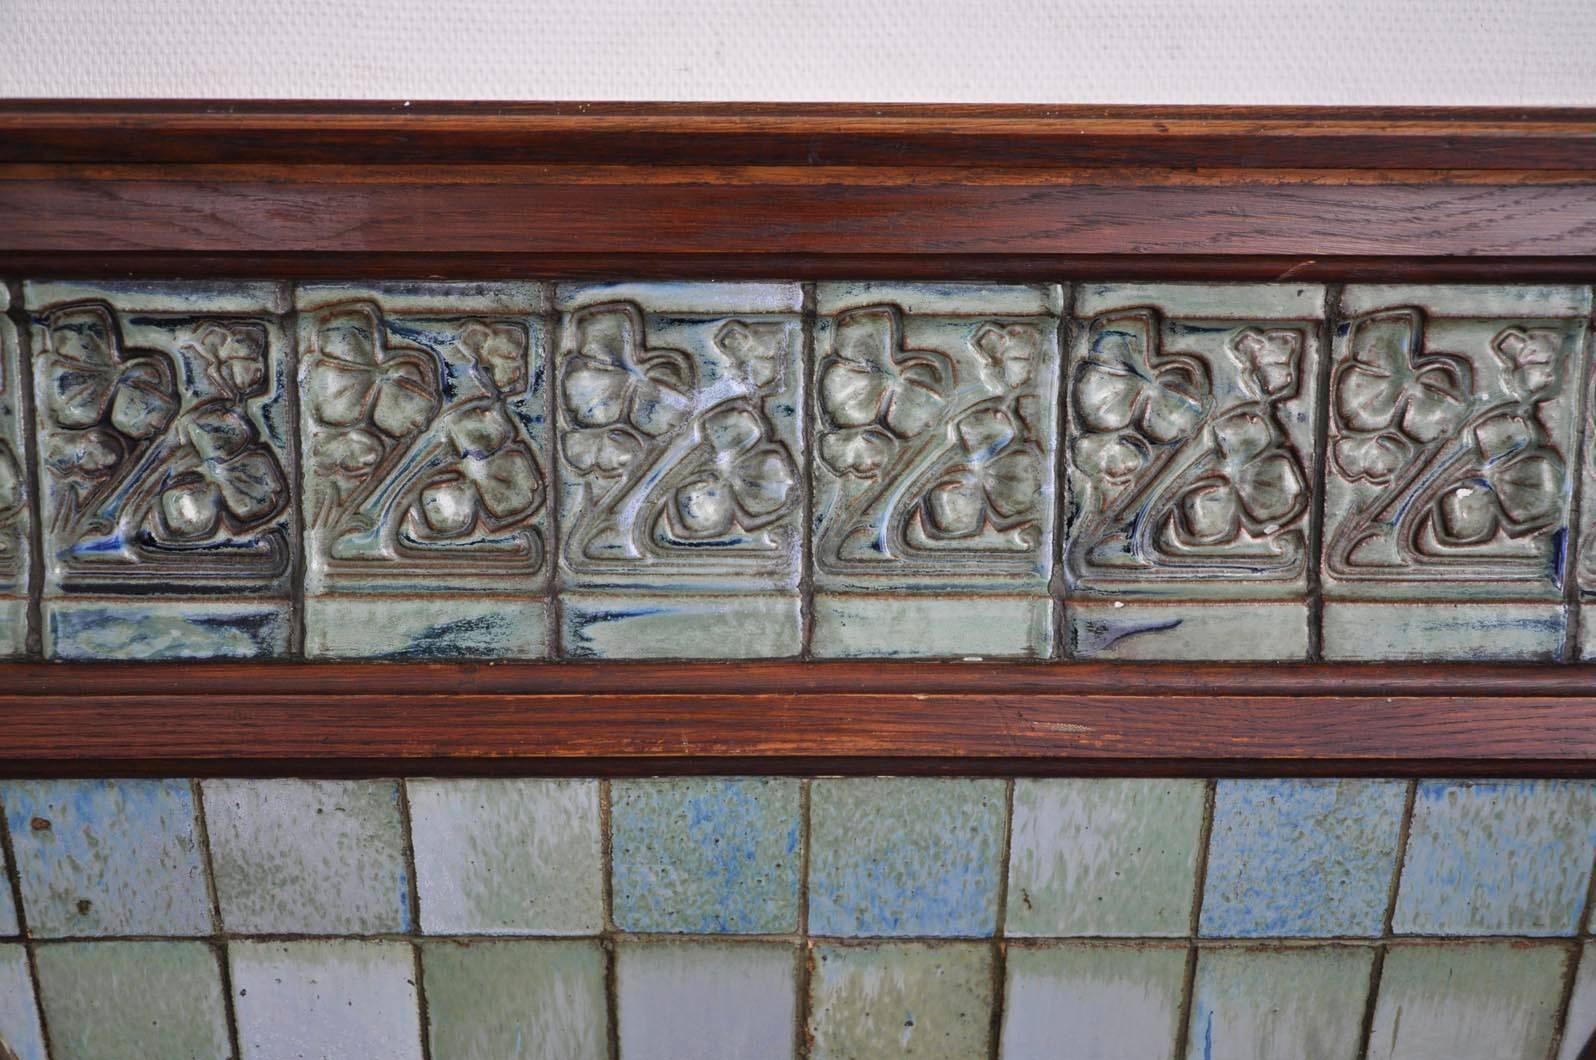 This small Art Nouveau style fireplace was made around 1900 and is attributed to the Gentil and Bourdet factory. The glazed stoneware tiles are framed by oakwood. The frieze is ornated with shamrock decor.
This fireplace is sold with its fireplace